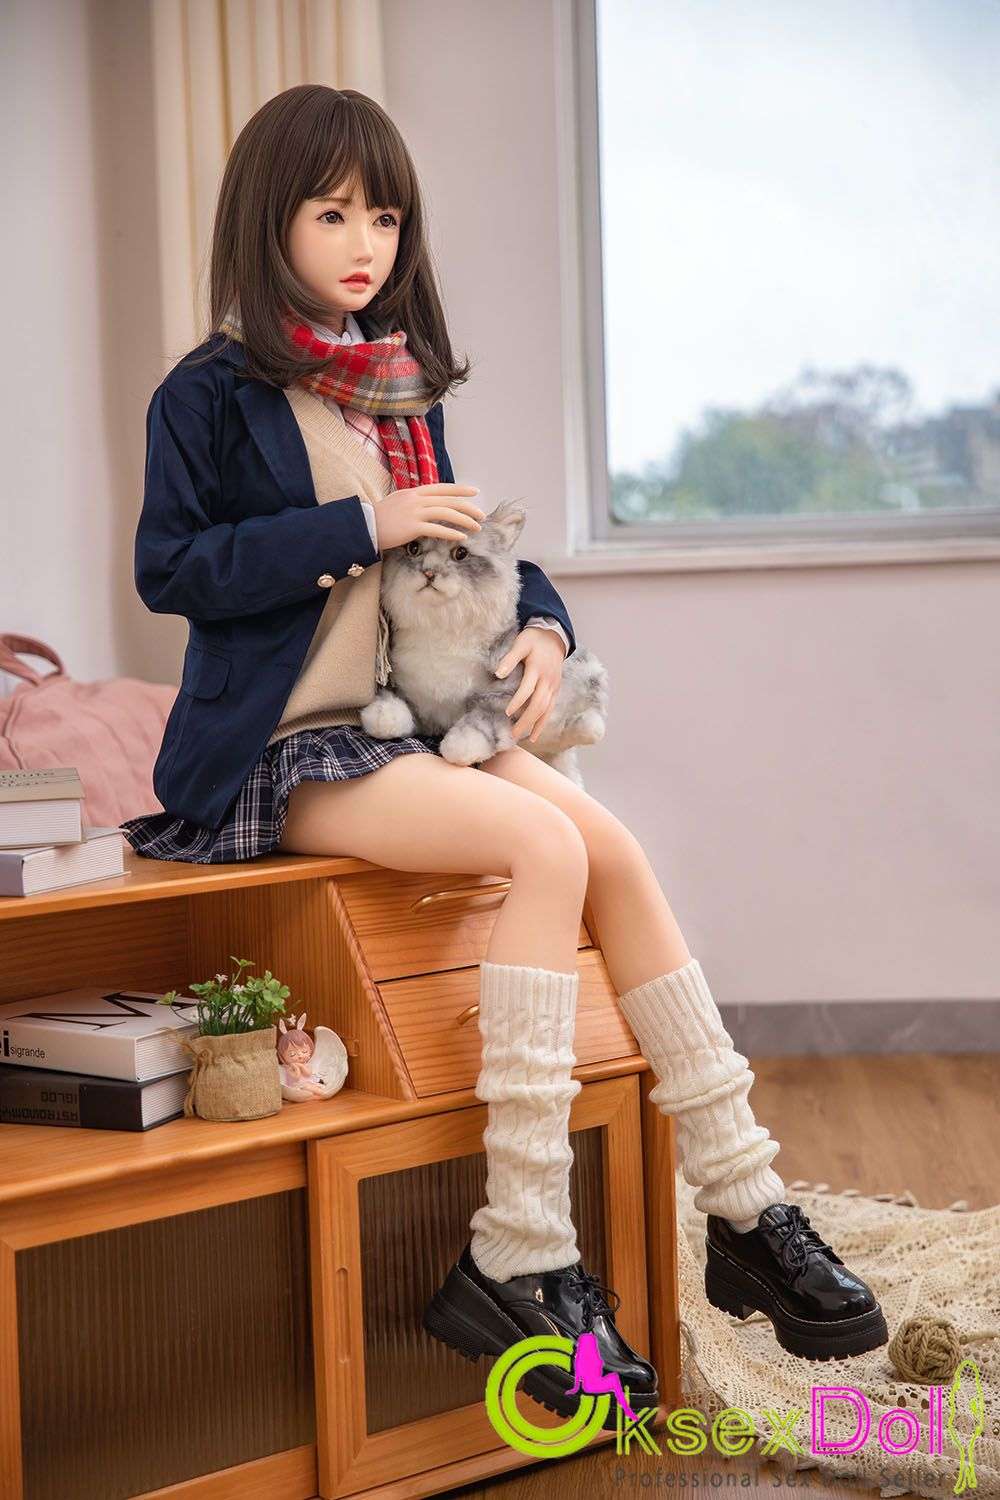 Japanese  Teen Sex Doll images